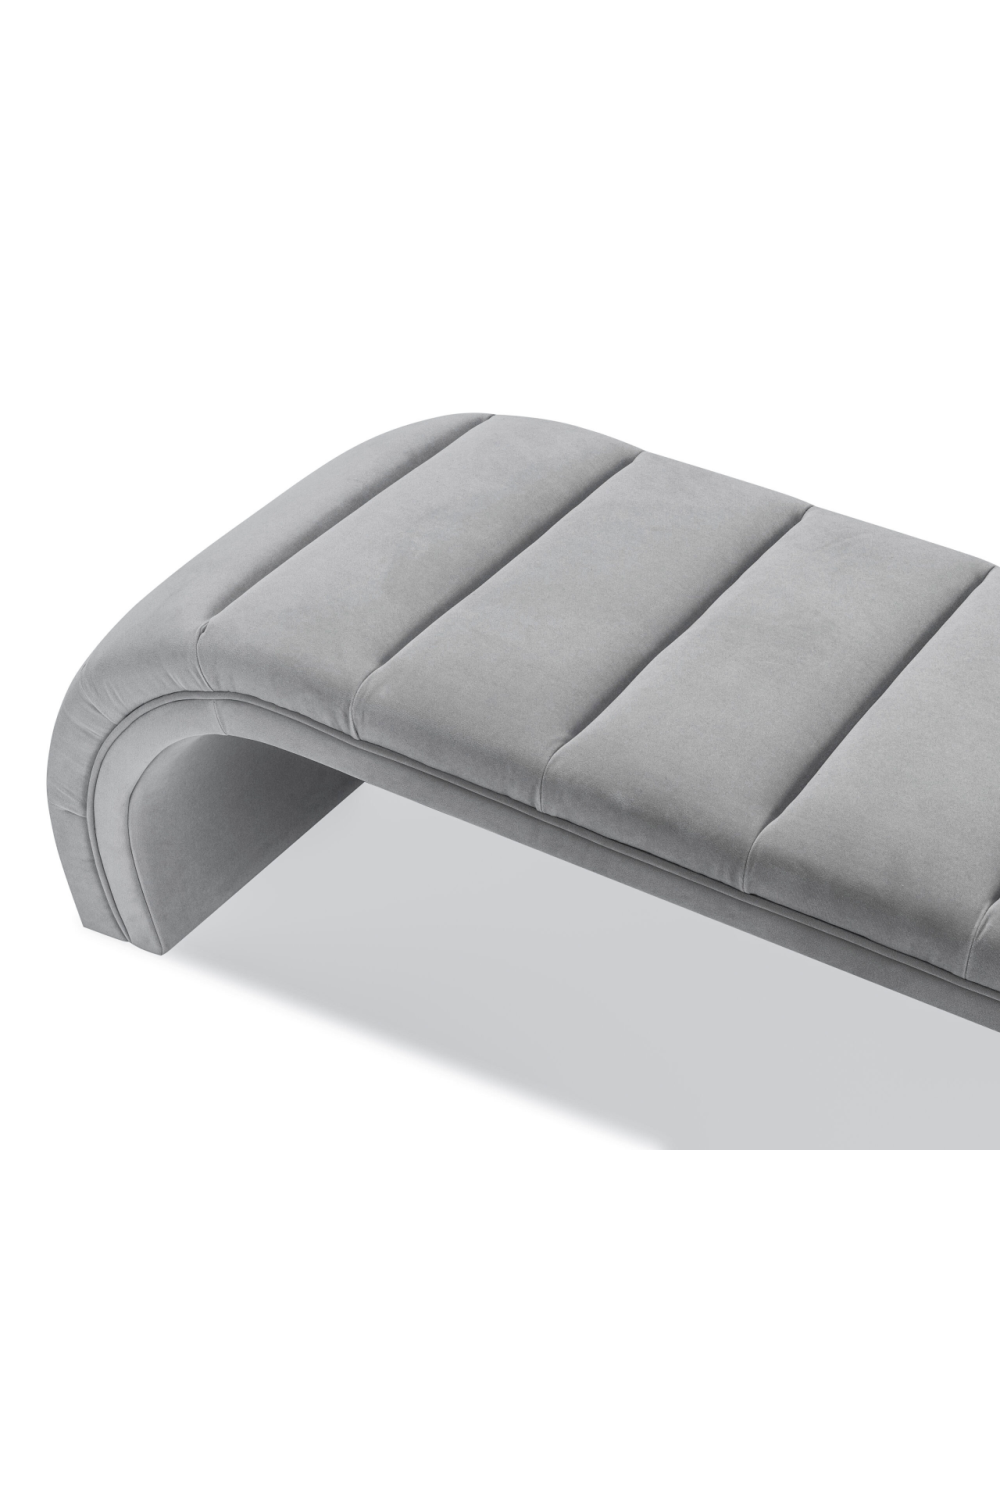 Modern Curved Bench | Liang & Eimil Coppola | Oroa.com